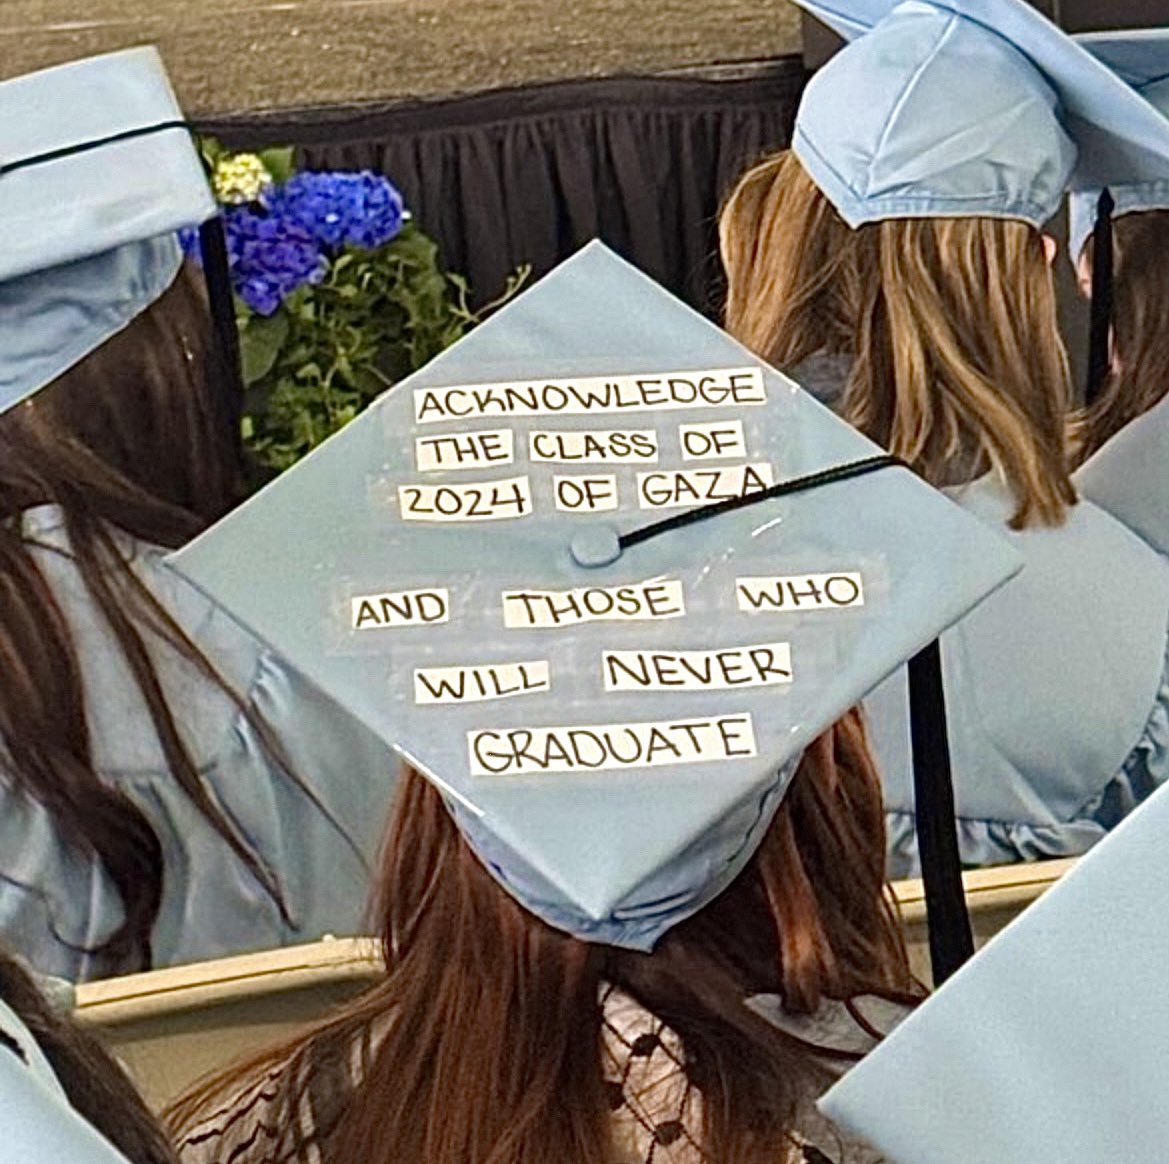 Seen during the Columbia School of Social Work's graduation ceremony.